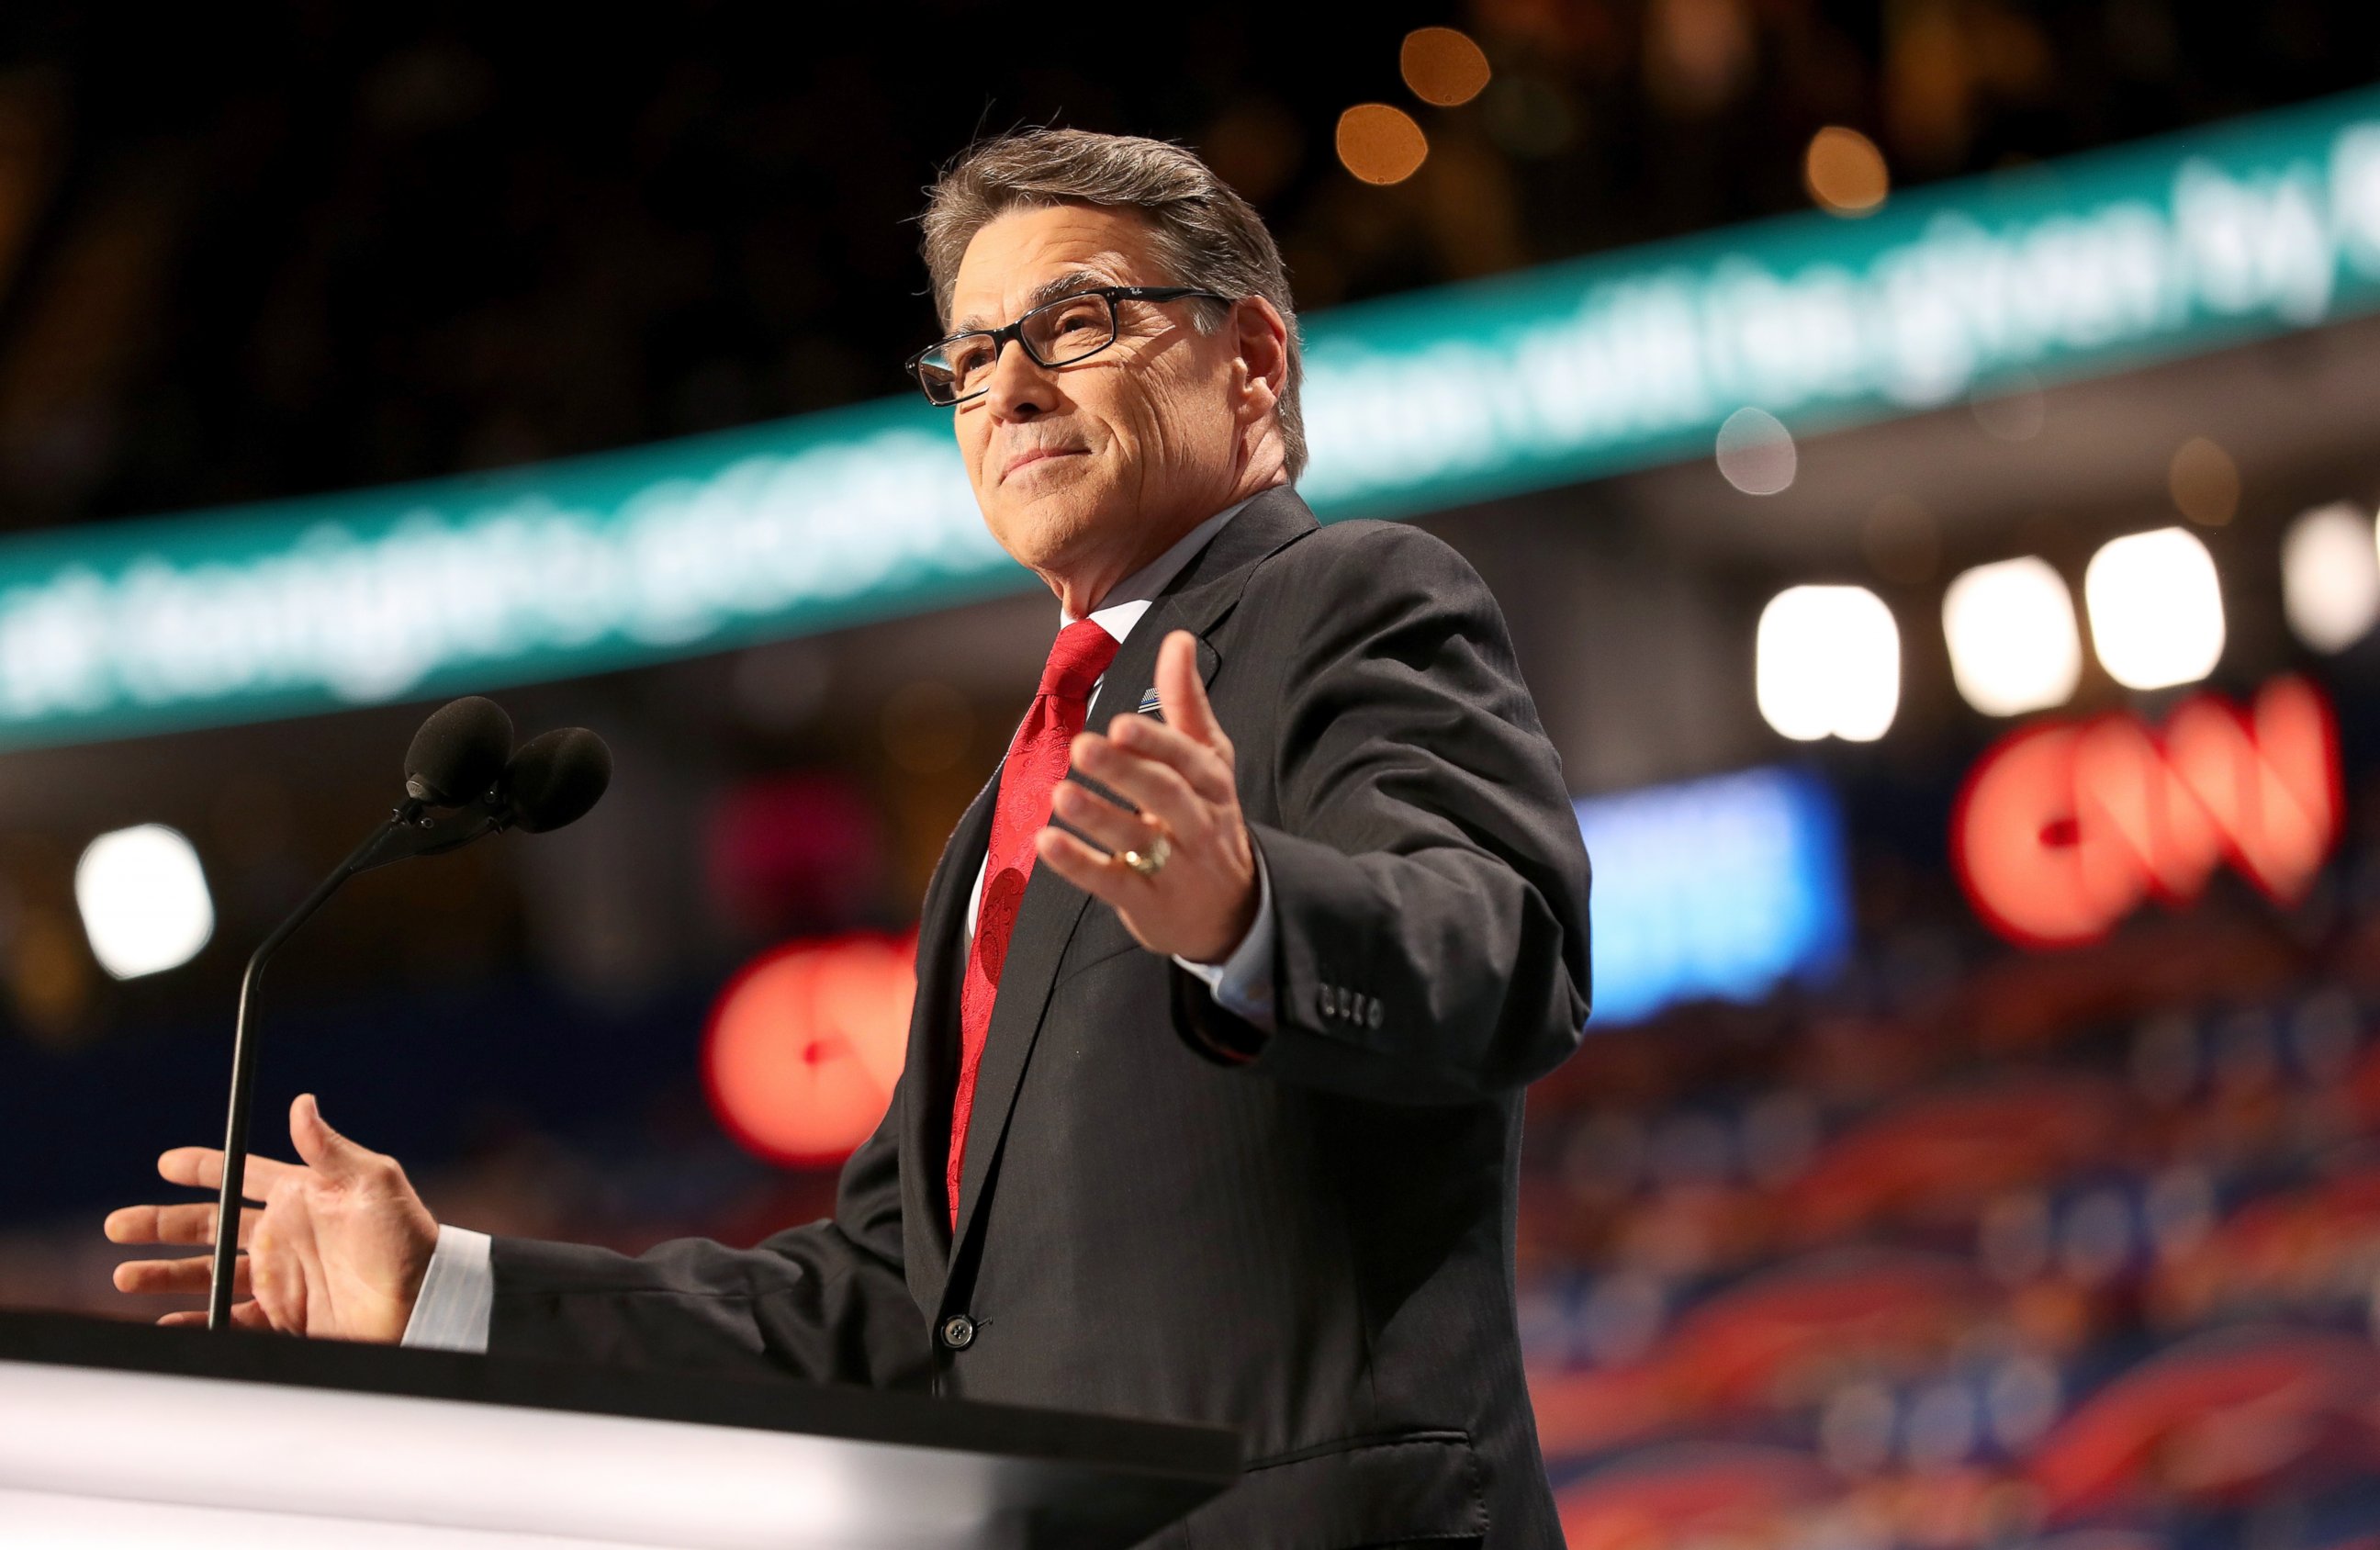 PHOTO: Rick Perry delivers a speech on the first day of the Republican National Convention, July 18, 2016, in Cleveland, Ohio.